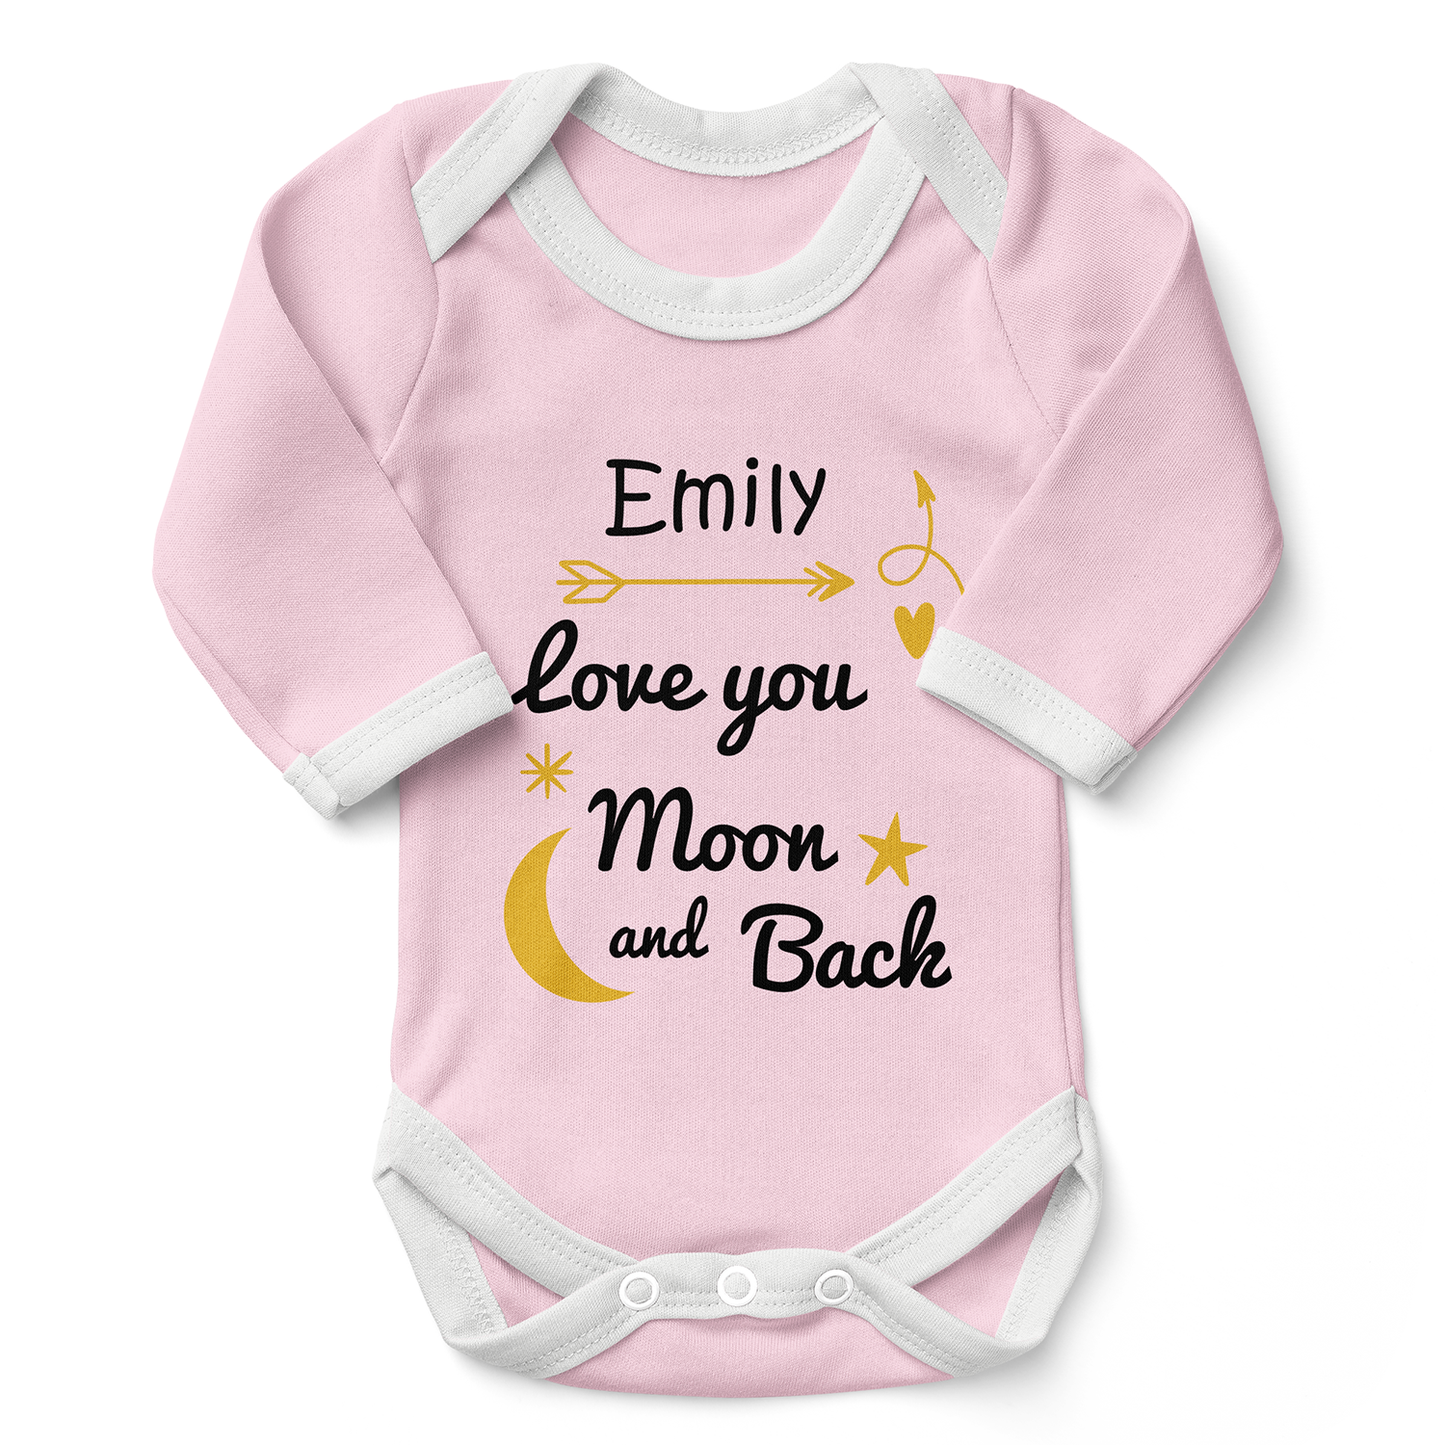 Personalized Organic Baby Bodysuit - Love You To The Moon & Back (Pink)